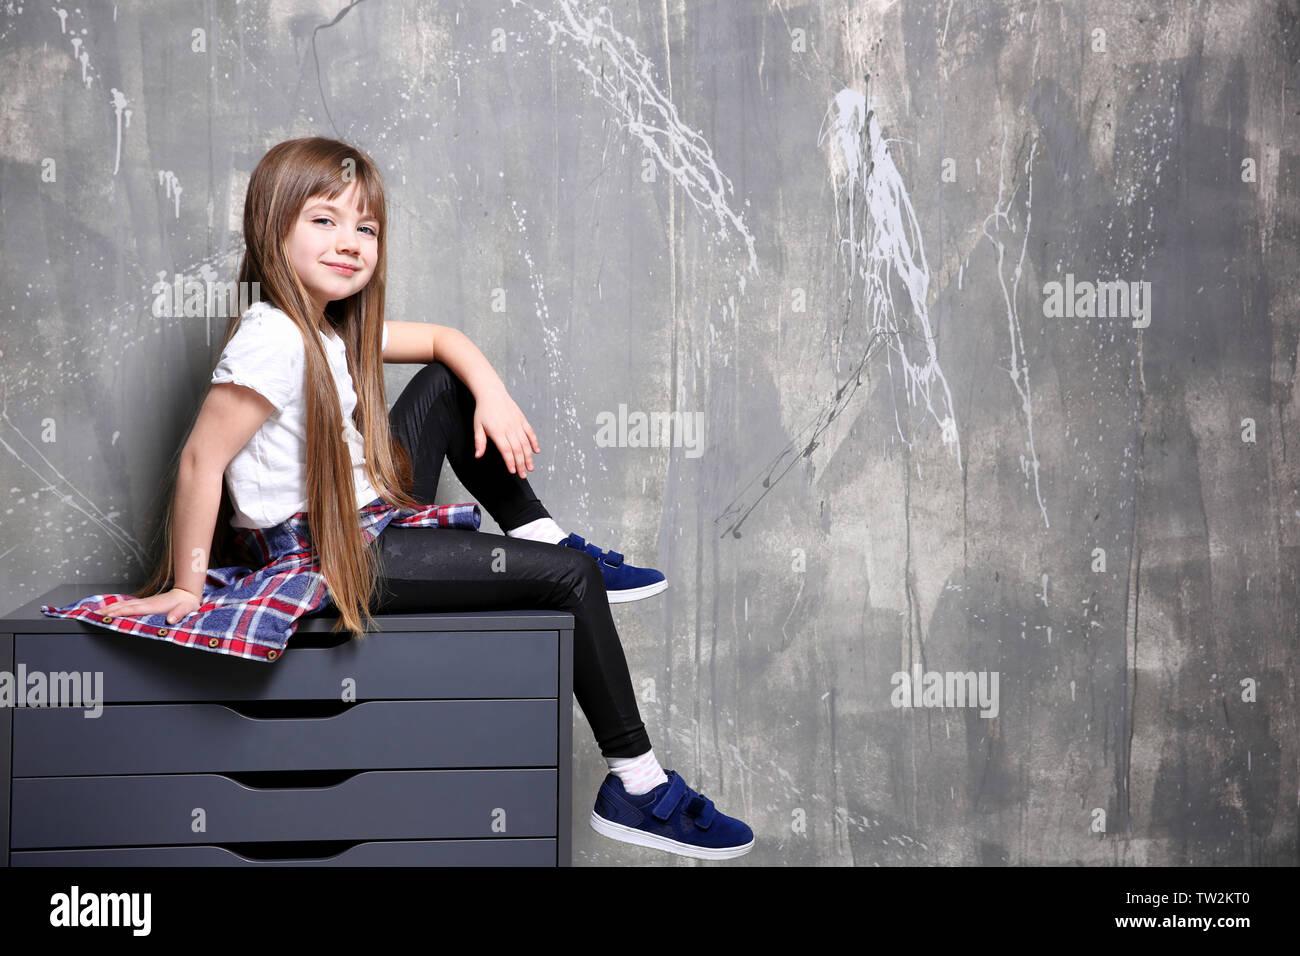 Cute Little Girl Sitting On Chest Of Drawers Against Textured Wall